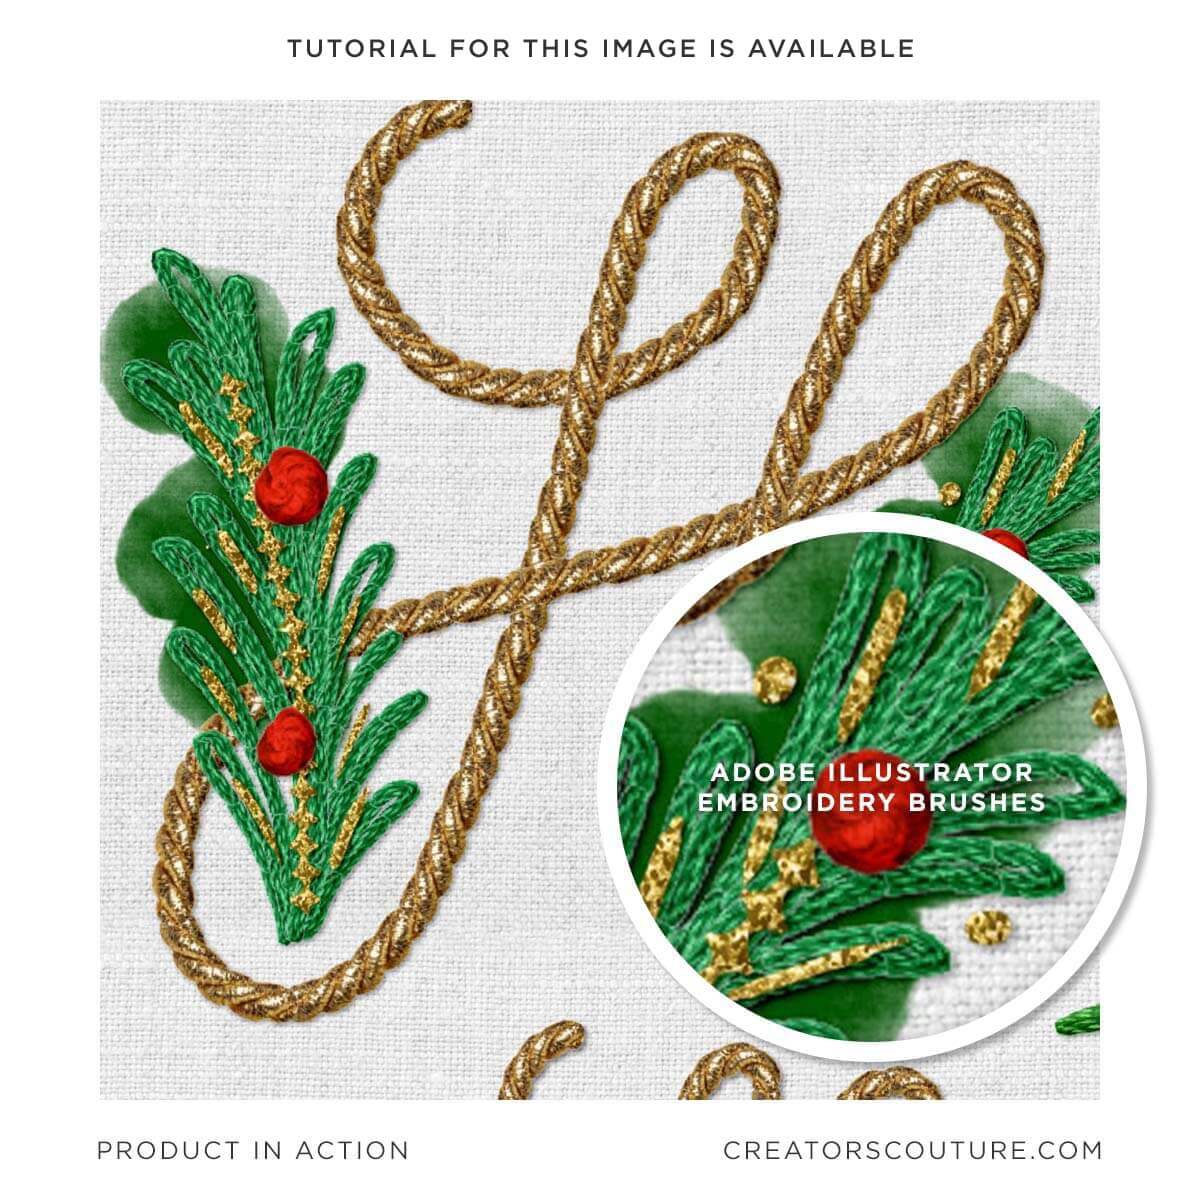 embroidery style Christmas monogram with metallic thread and holiday greenery in an embroidery style, created in Adobe Illustrator and Photoshop